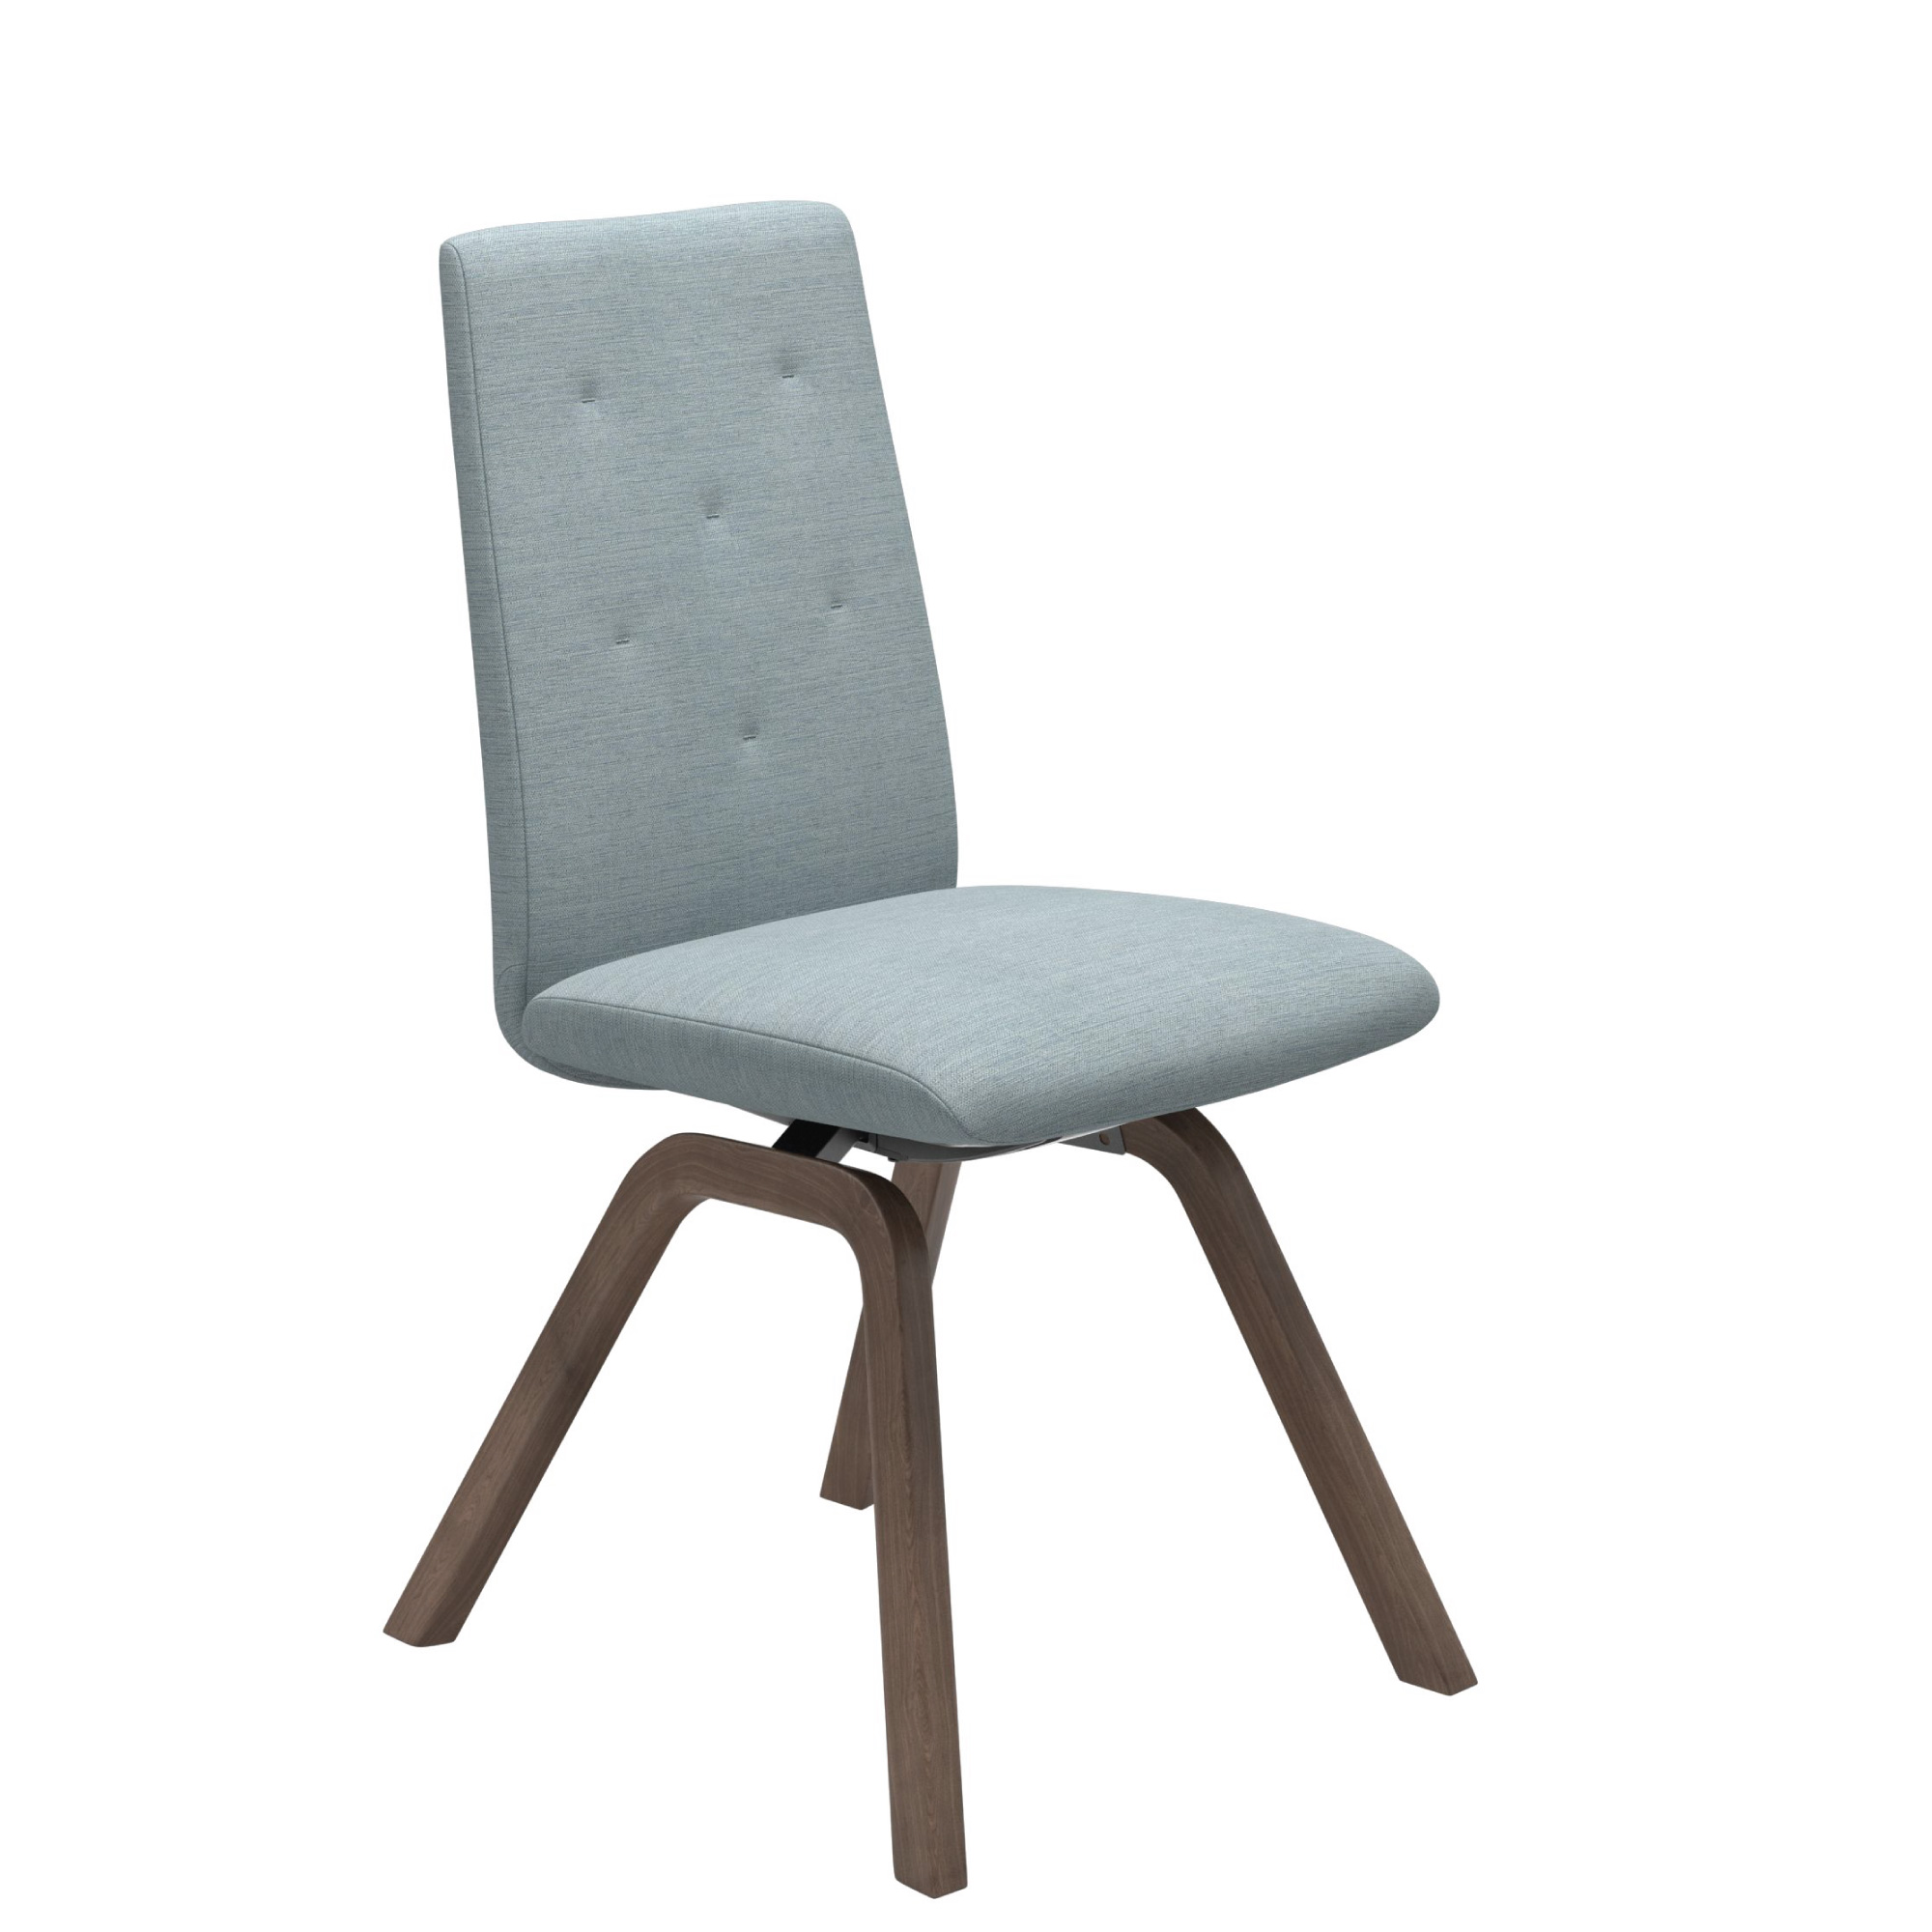 16-Rosemary-chair-Low-D200-1pcs-assembled